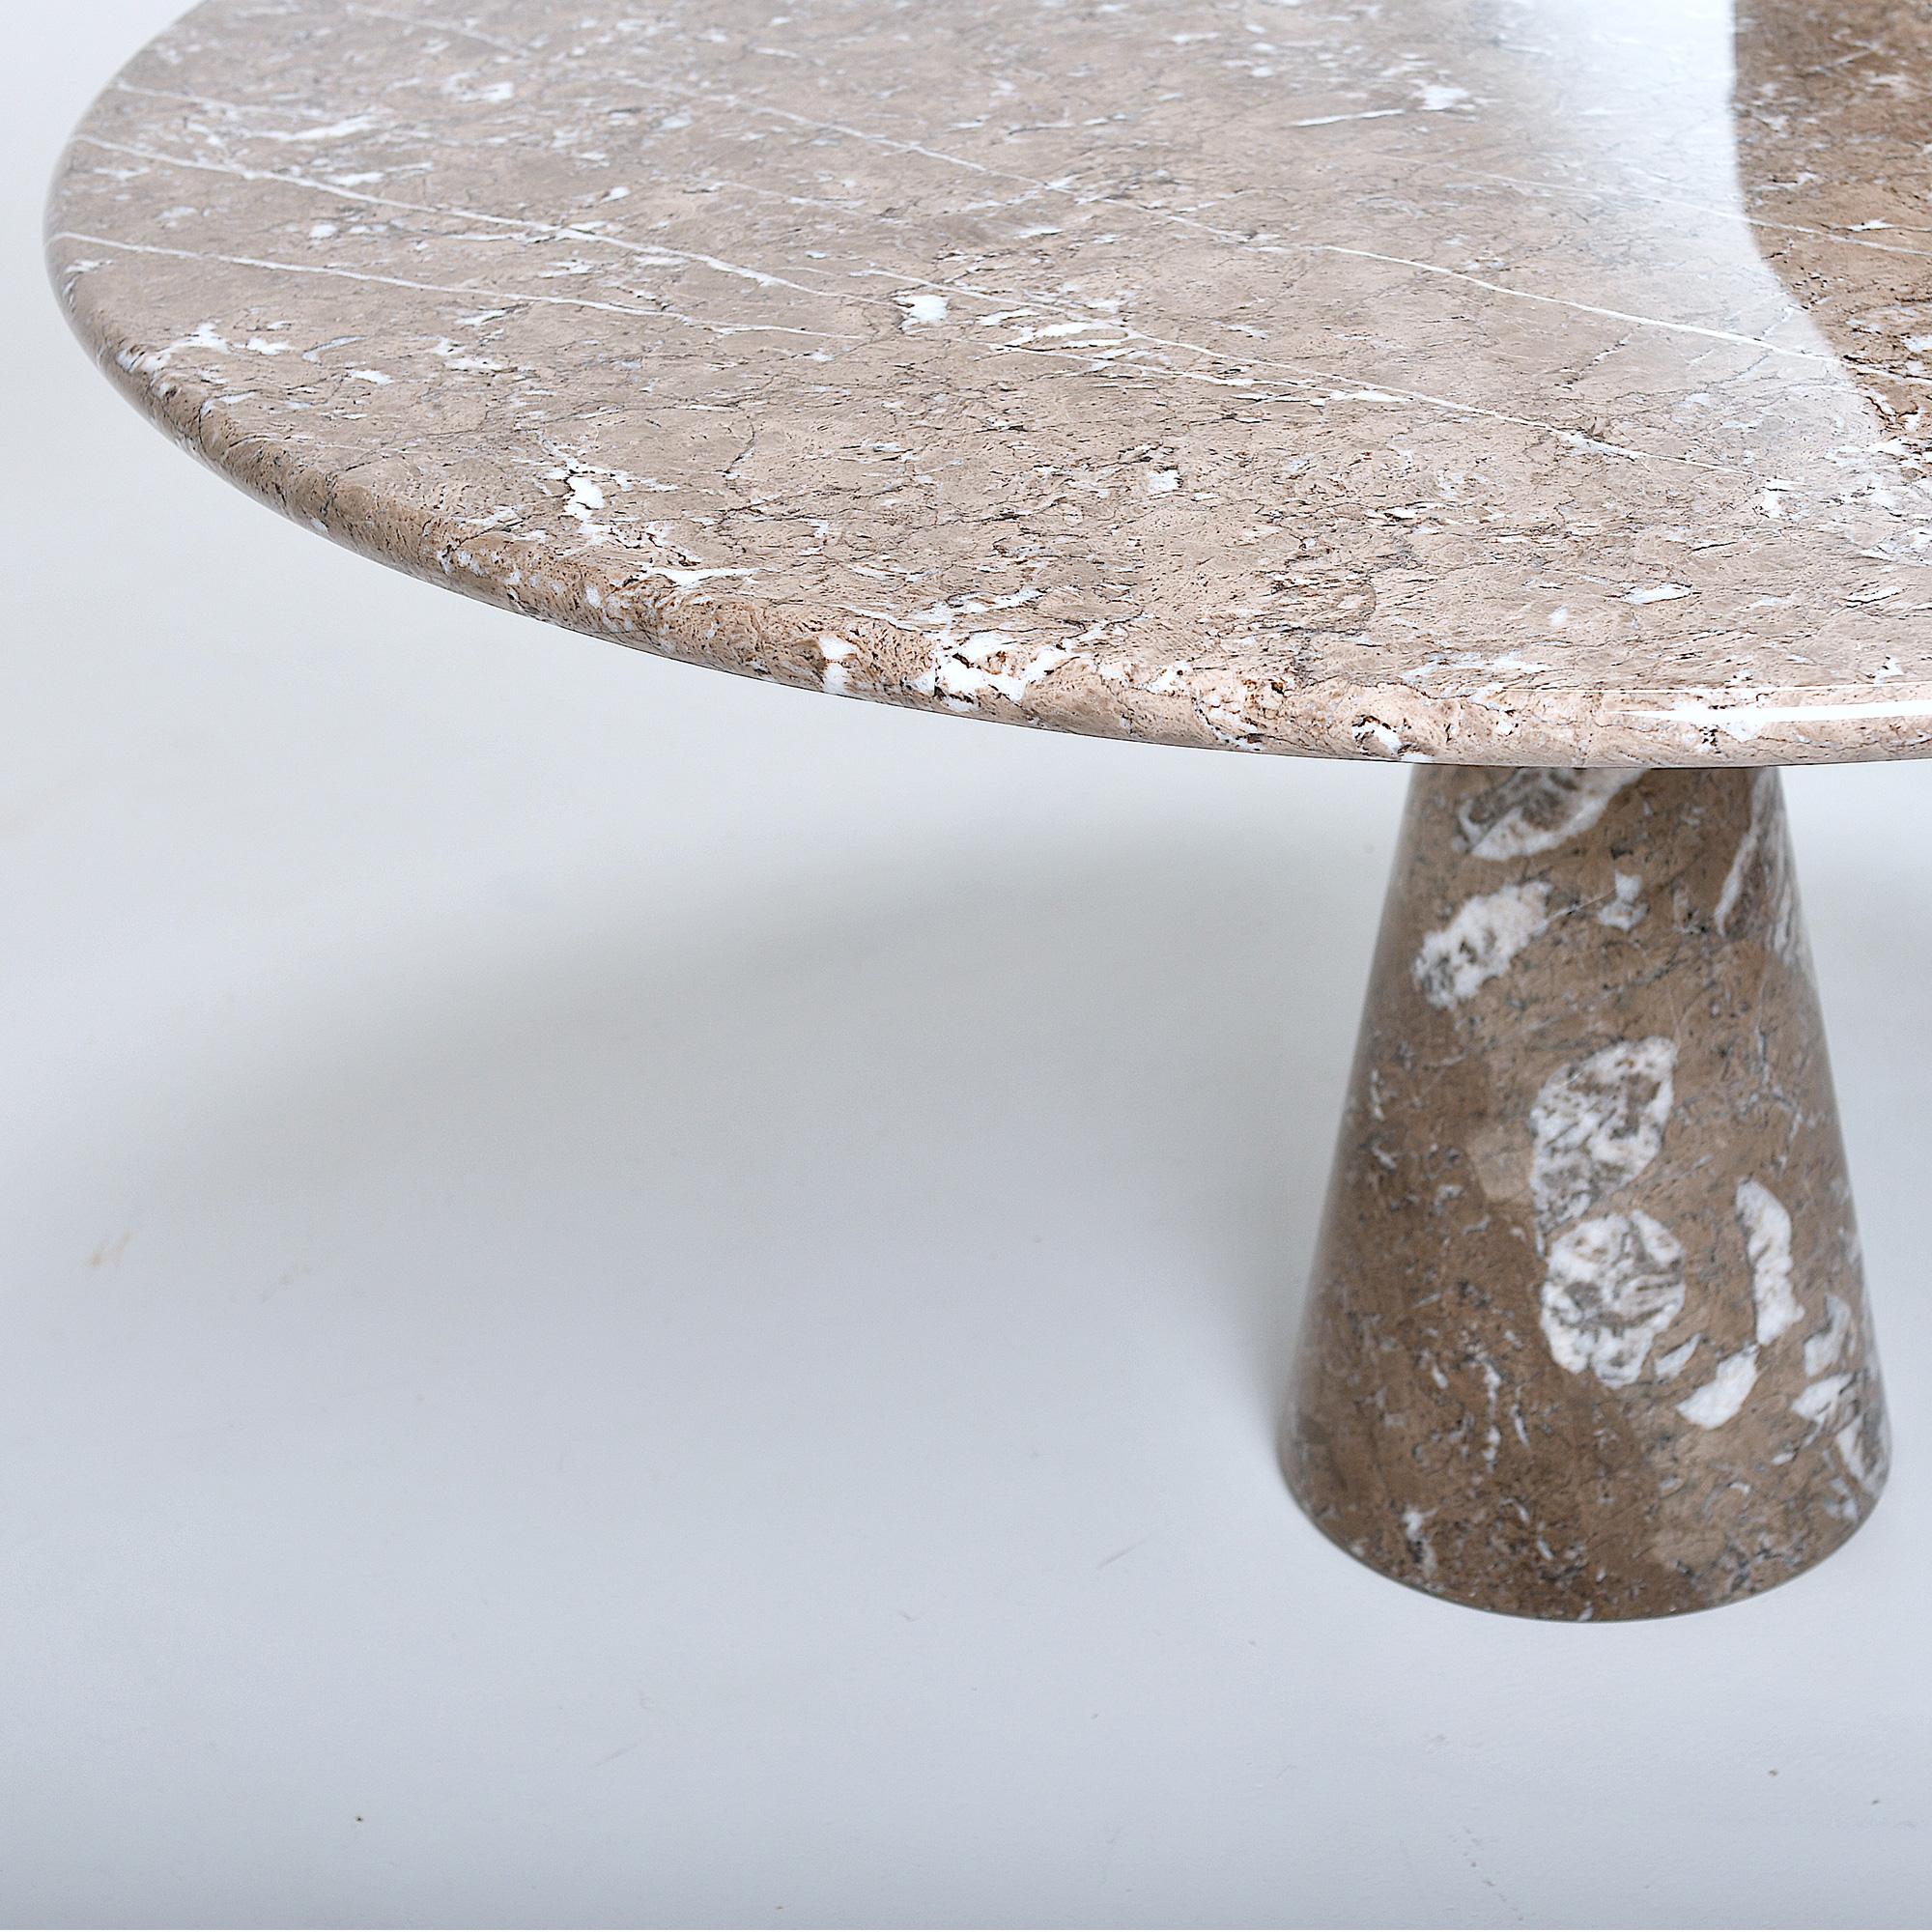 Post-Modern Mid-Century Modern Angelo Mangiarotti Marble Dining Table 1972 by Skipper, Italy